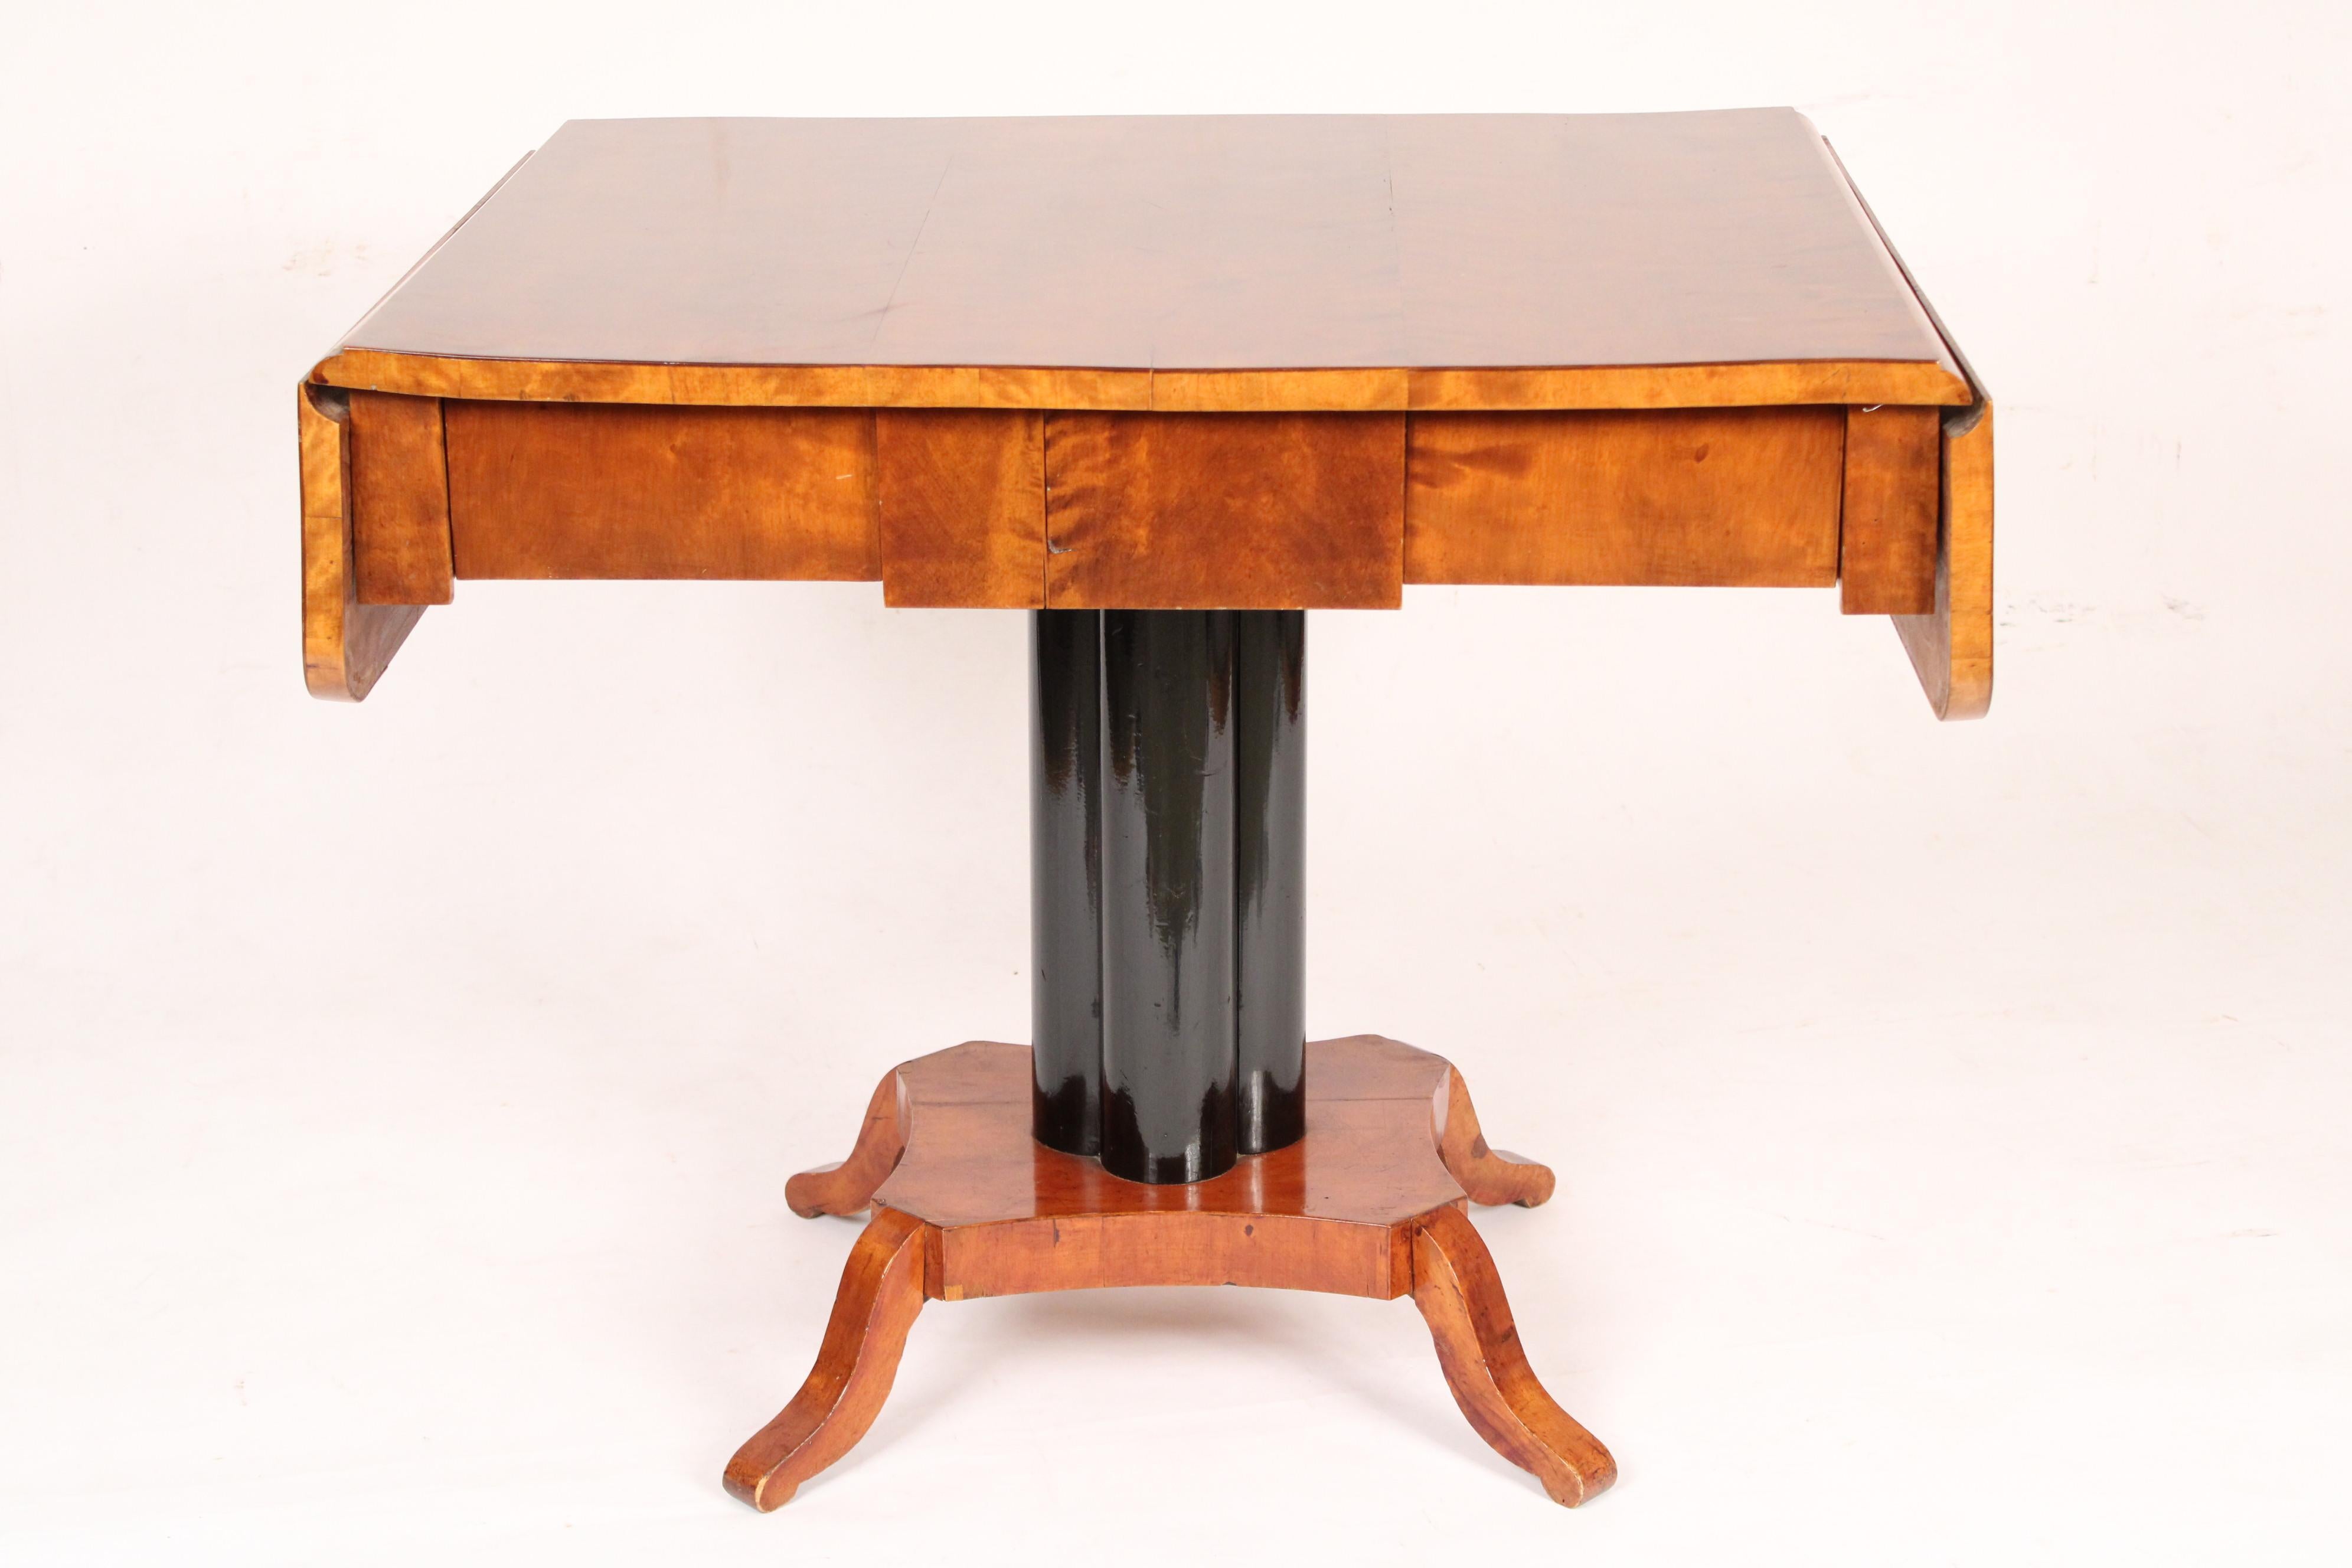 Biederemier birch drop leaf sofa table, circa 1835. With a rectangular birch top with two drop leaves, a drawer in the frieze, an ebonized pedestal and four down swept feet. The birch top and drop leaves have excellent feathering. Hand dovetailed